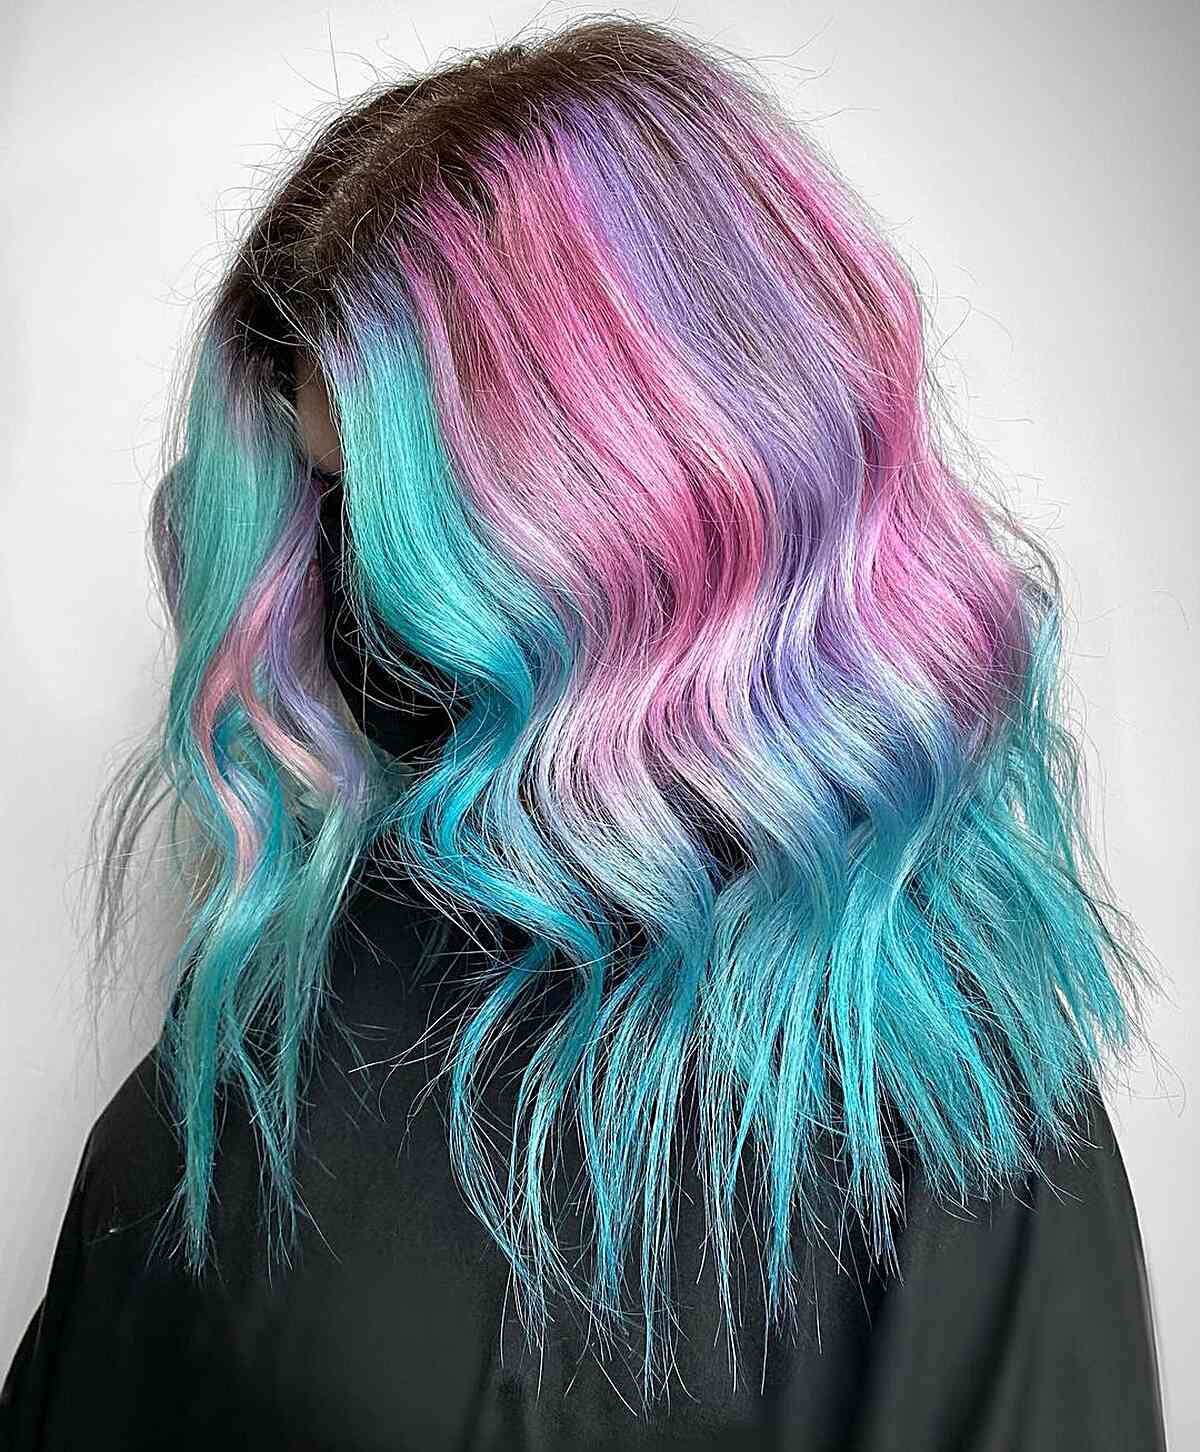 Multi-Colored Cotton Candy Hair with Dark Roots for Medium Hair